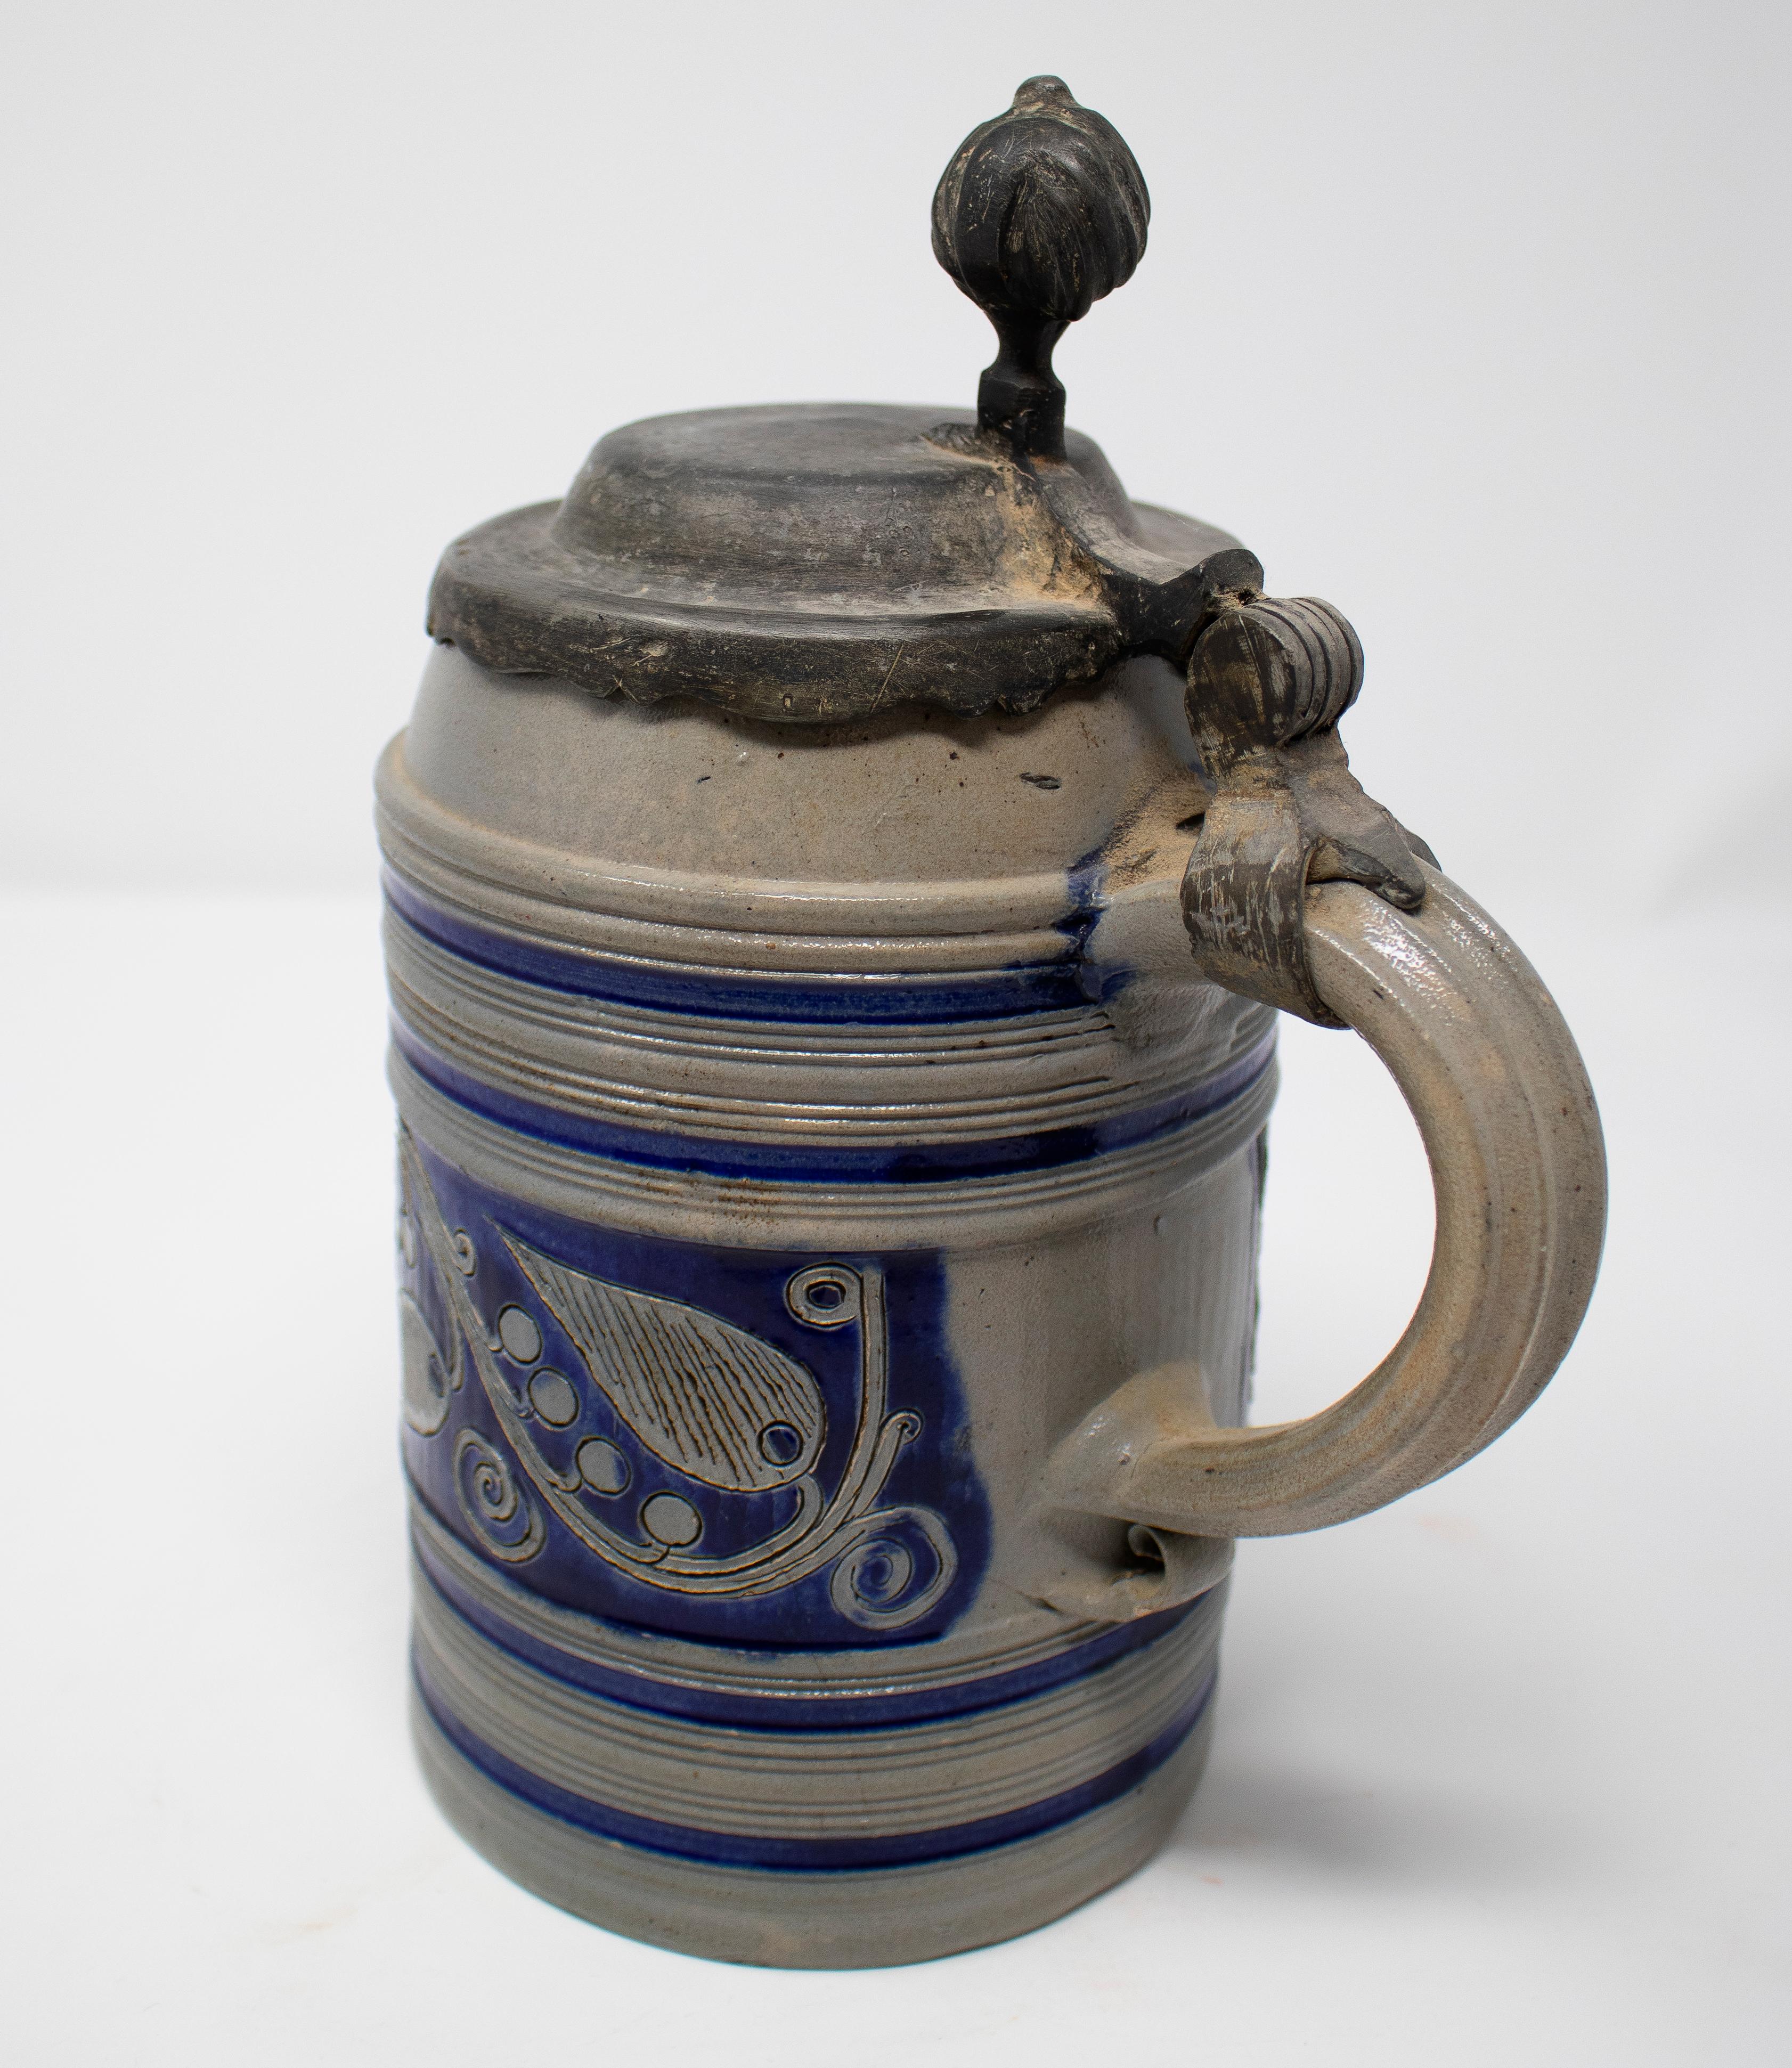 Ceramic 19th Century German Earthenware Beer Stein Mug with Tin Lid and Cobalt Blue